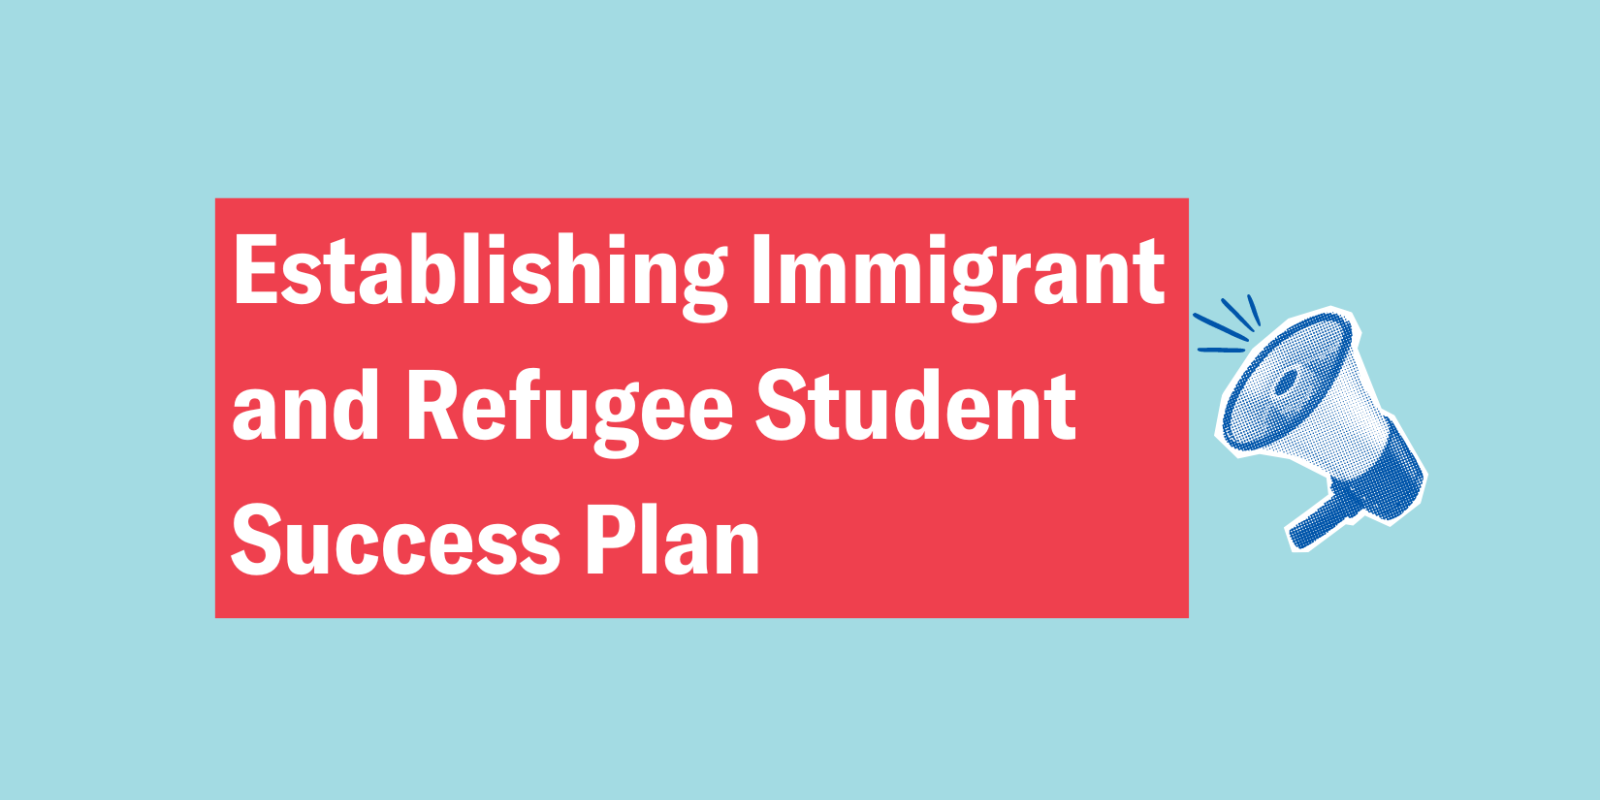 LC 264: Establishing Immigrant and Refugee Student Success Plan